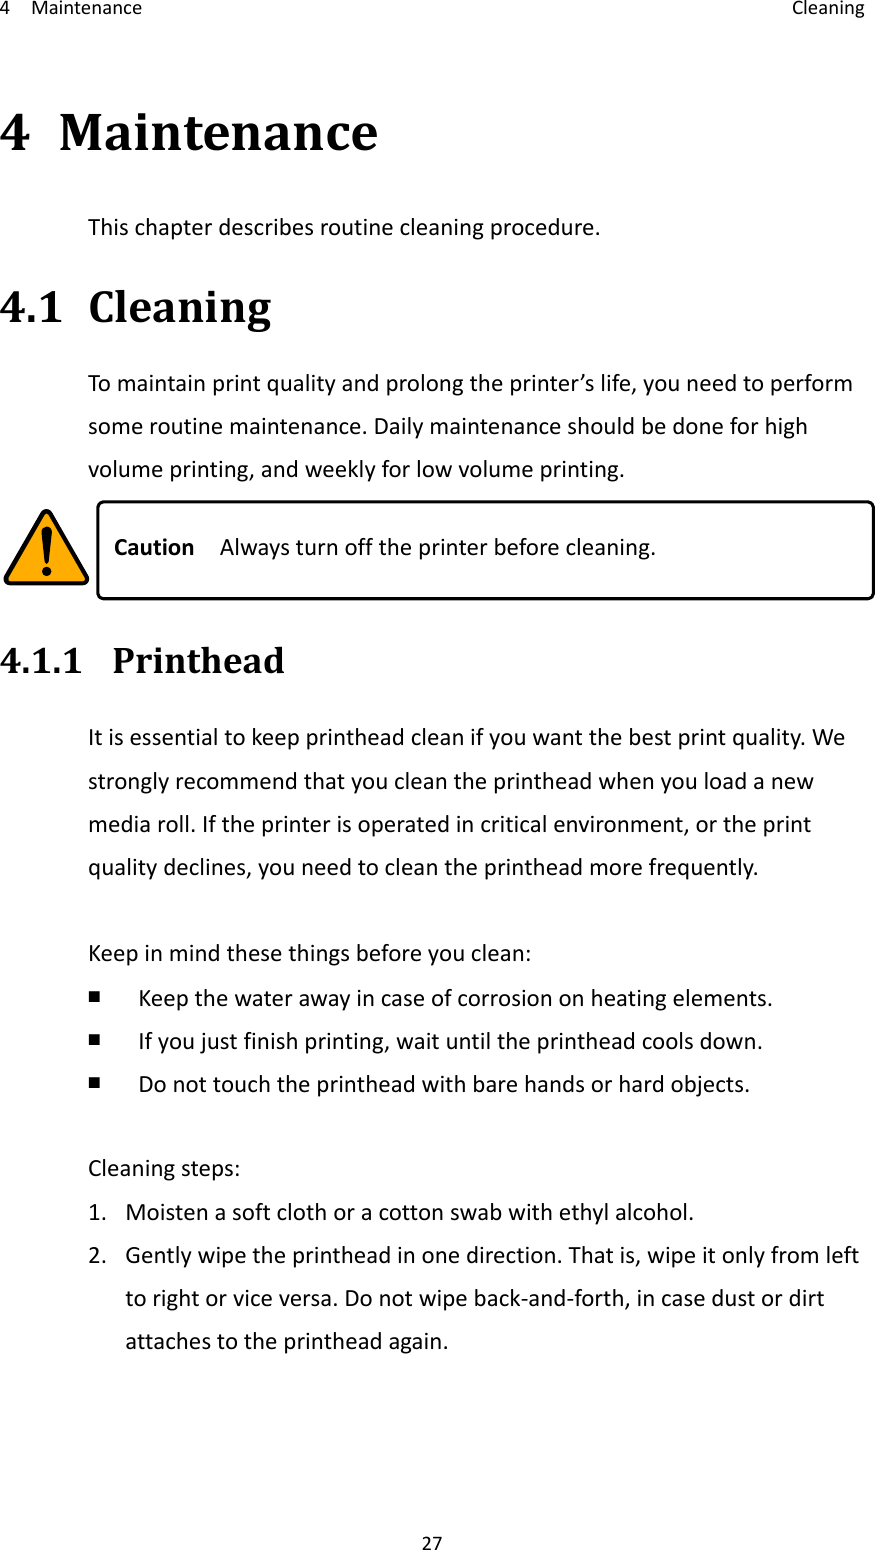 4Maintenance Cleaning274 MaintenanceThischapterdescribesroutinecleaningprocedure.4.1 CleaningTomaintainprintqualityandprolongtheprinter’slife,youneedtoperformsomeroutinemaintenance.Dailymaintenanceshouldbedoneforhighvolumeprinting,andweeklyforlowvolumeprinting.CautionAlwaysturnofftheprinterbeforecleaning.4.1.1 PrintheadItisessentialtokeepprintheadcleanifyouwantthebestprintquality.Westronglyrecommendthatyoucleantheprintheadwhenyouloadanewmediaroll.Iftheprinterisoperatedincriticalenvironment,ortheprintqualitydeclines,youneedtocleantheprintheadmorefrequently.Keepinmindthesethingsbeforeyouclean:￭ Keepthewaterawayincaseofcorrosiononheatingelements.￭ Ifyoujustfinishprinting,waituntiltheprintheadcoolsdown.￭ Donottouchtheprintheadwithbarehandsorhardobjects.Cleaningsteps:1. Moistenasoftclothoracottonswabwithethylalcohol.2. Gentlywipetheprintheadinonedirection.Thatis,wipeitonlyfromlefttorightorviceversa.Donotwipeback‐and‐forth,incasedustordirtattachestotheprintheadagain.